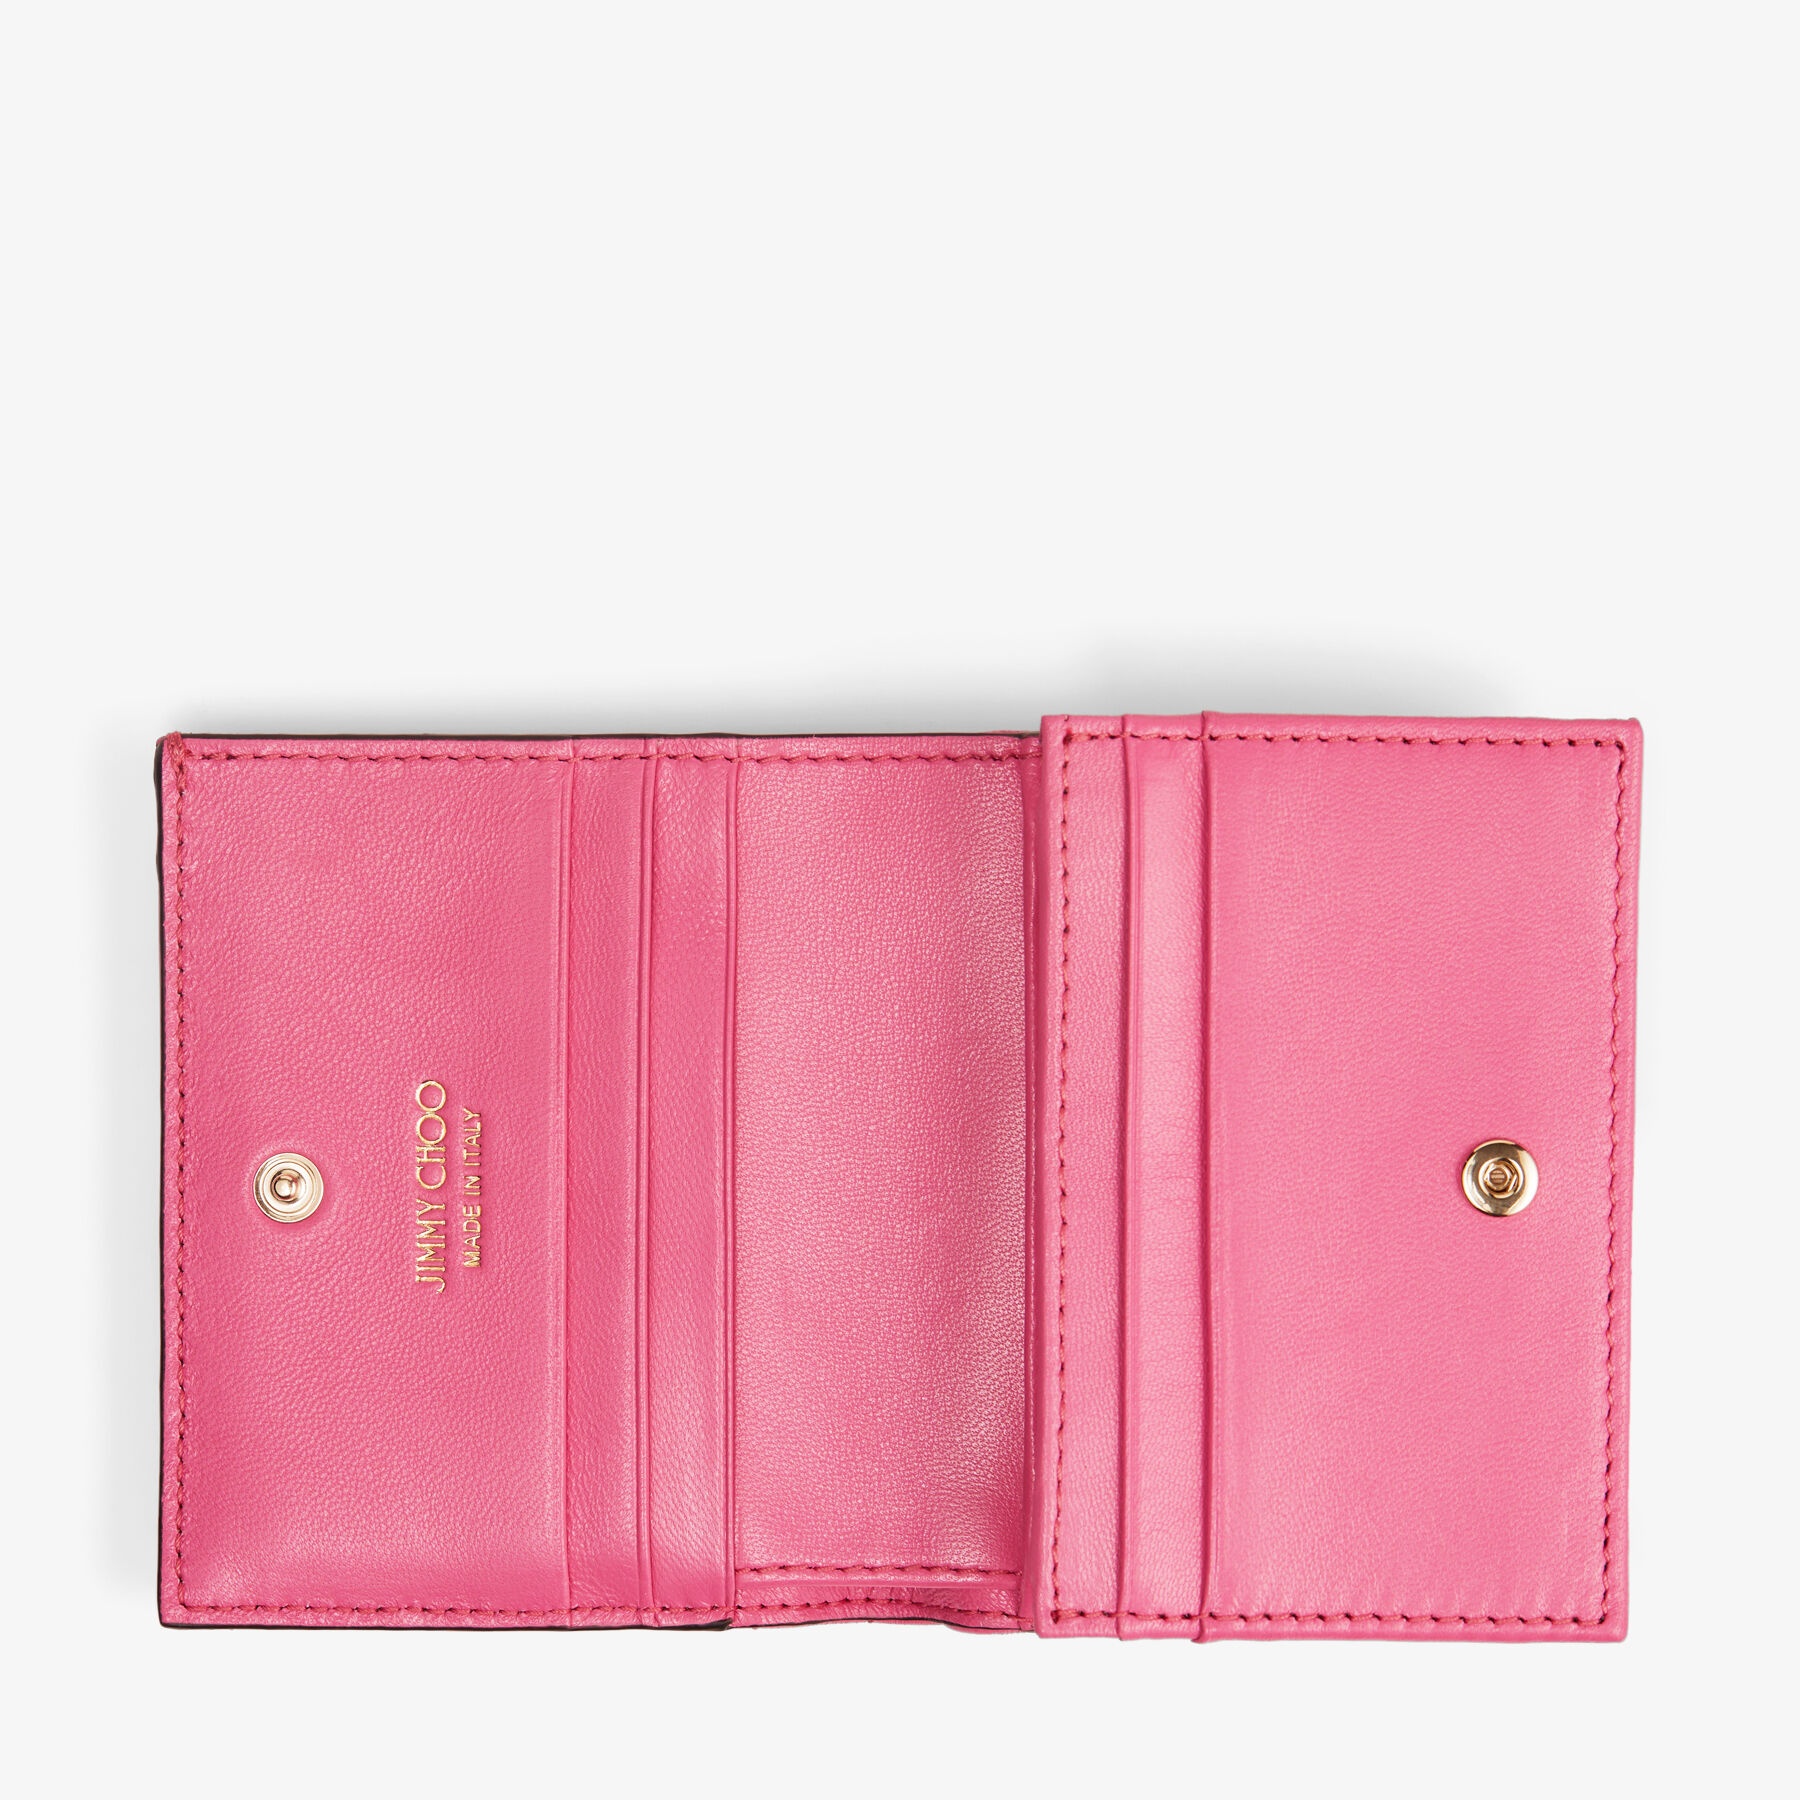 Hanne
Candy Pink Avenue Nappa Leather Wallet with Light Gold JC Emblem - 3